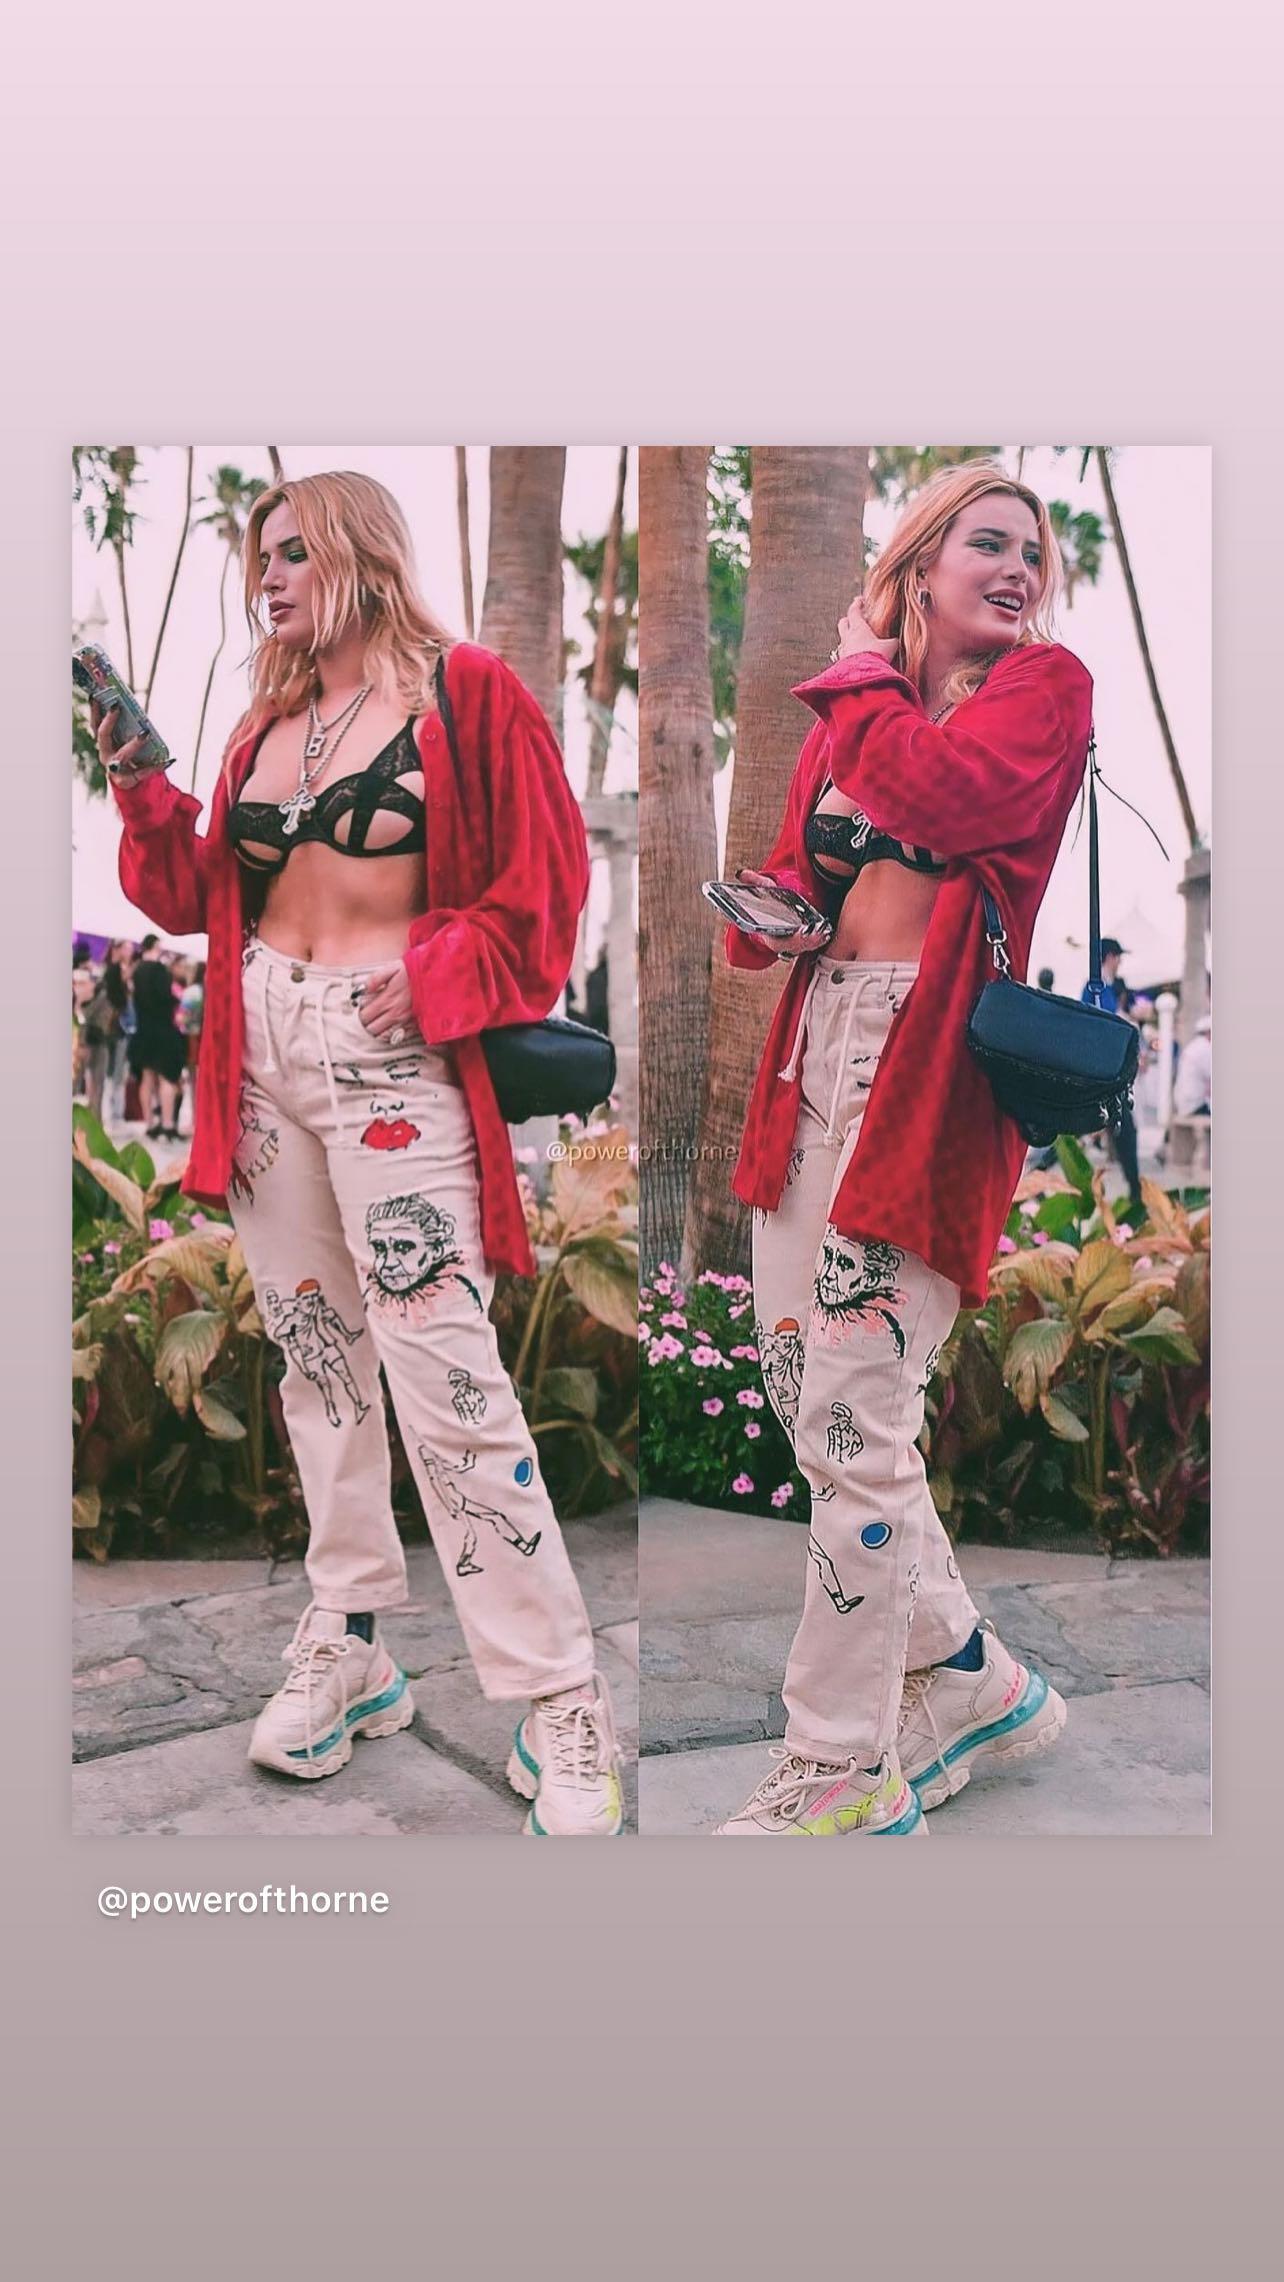 Bella Thorne posing for the camera.